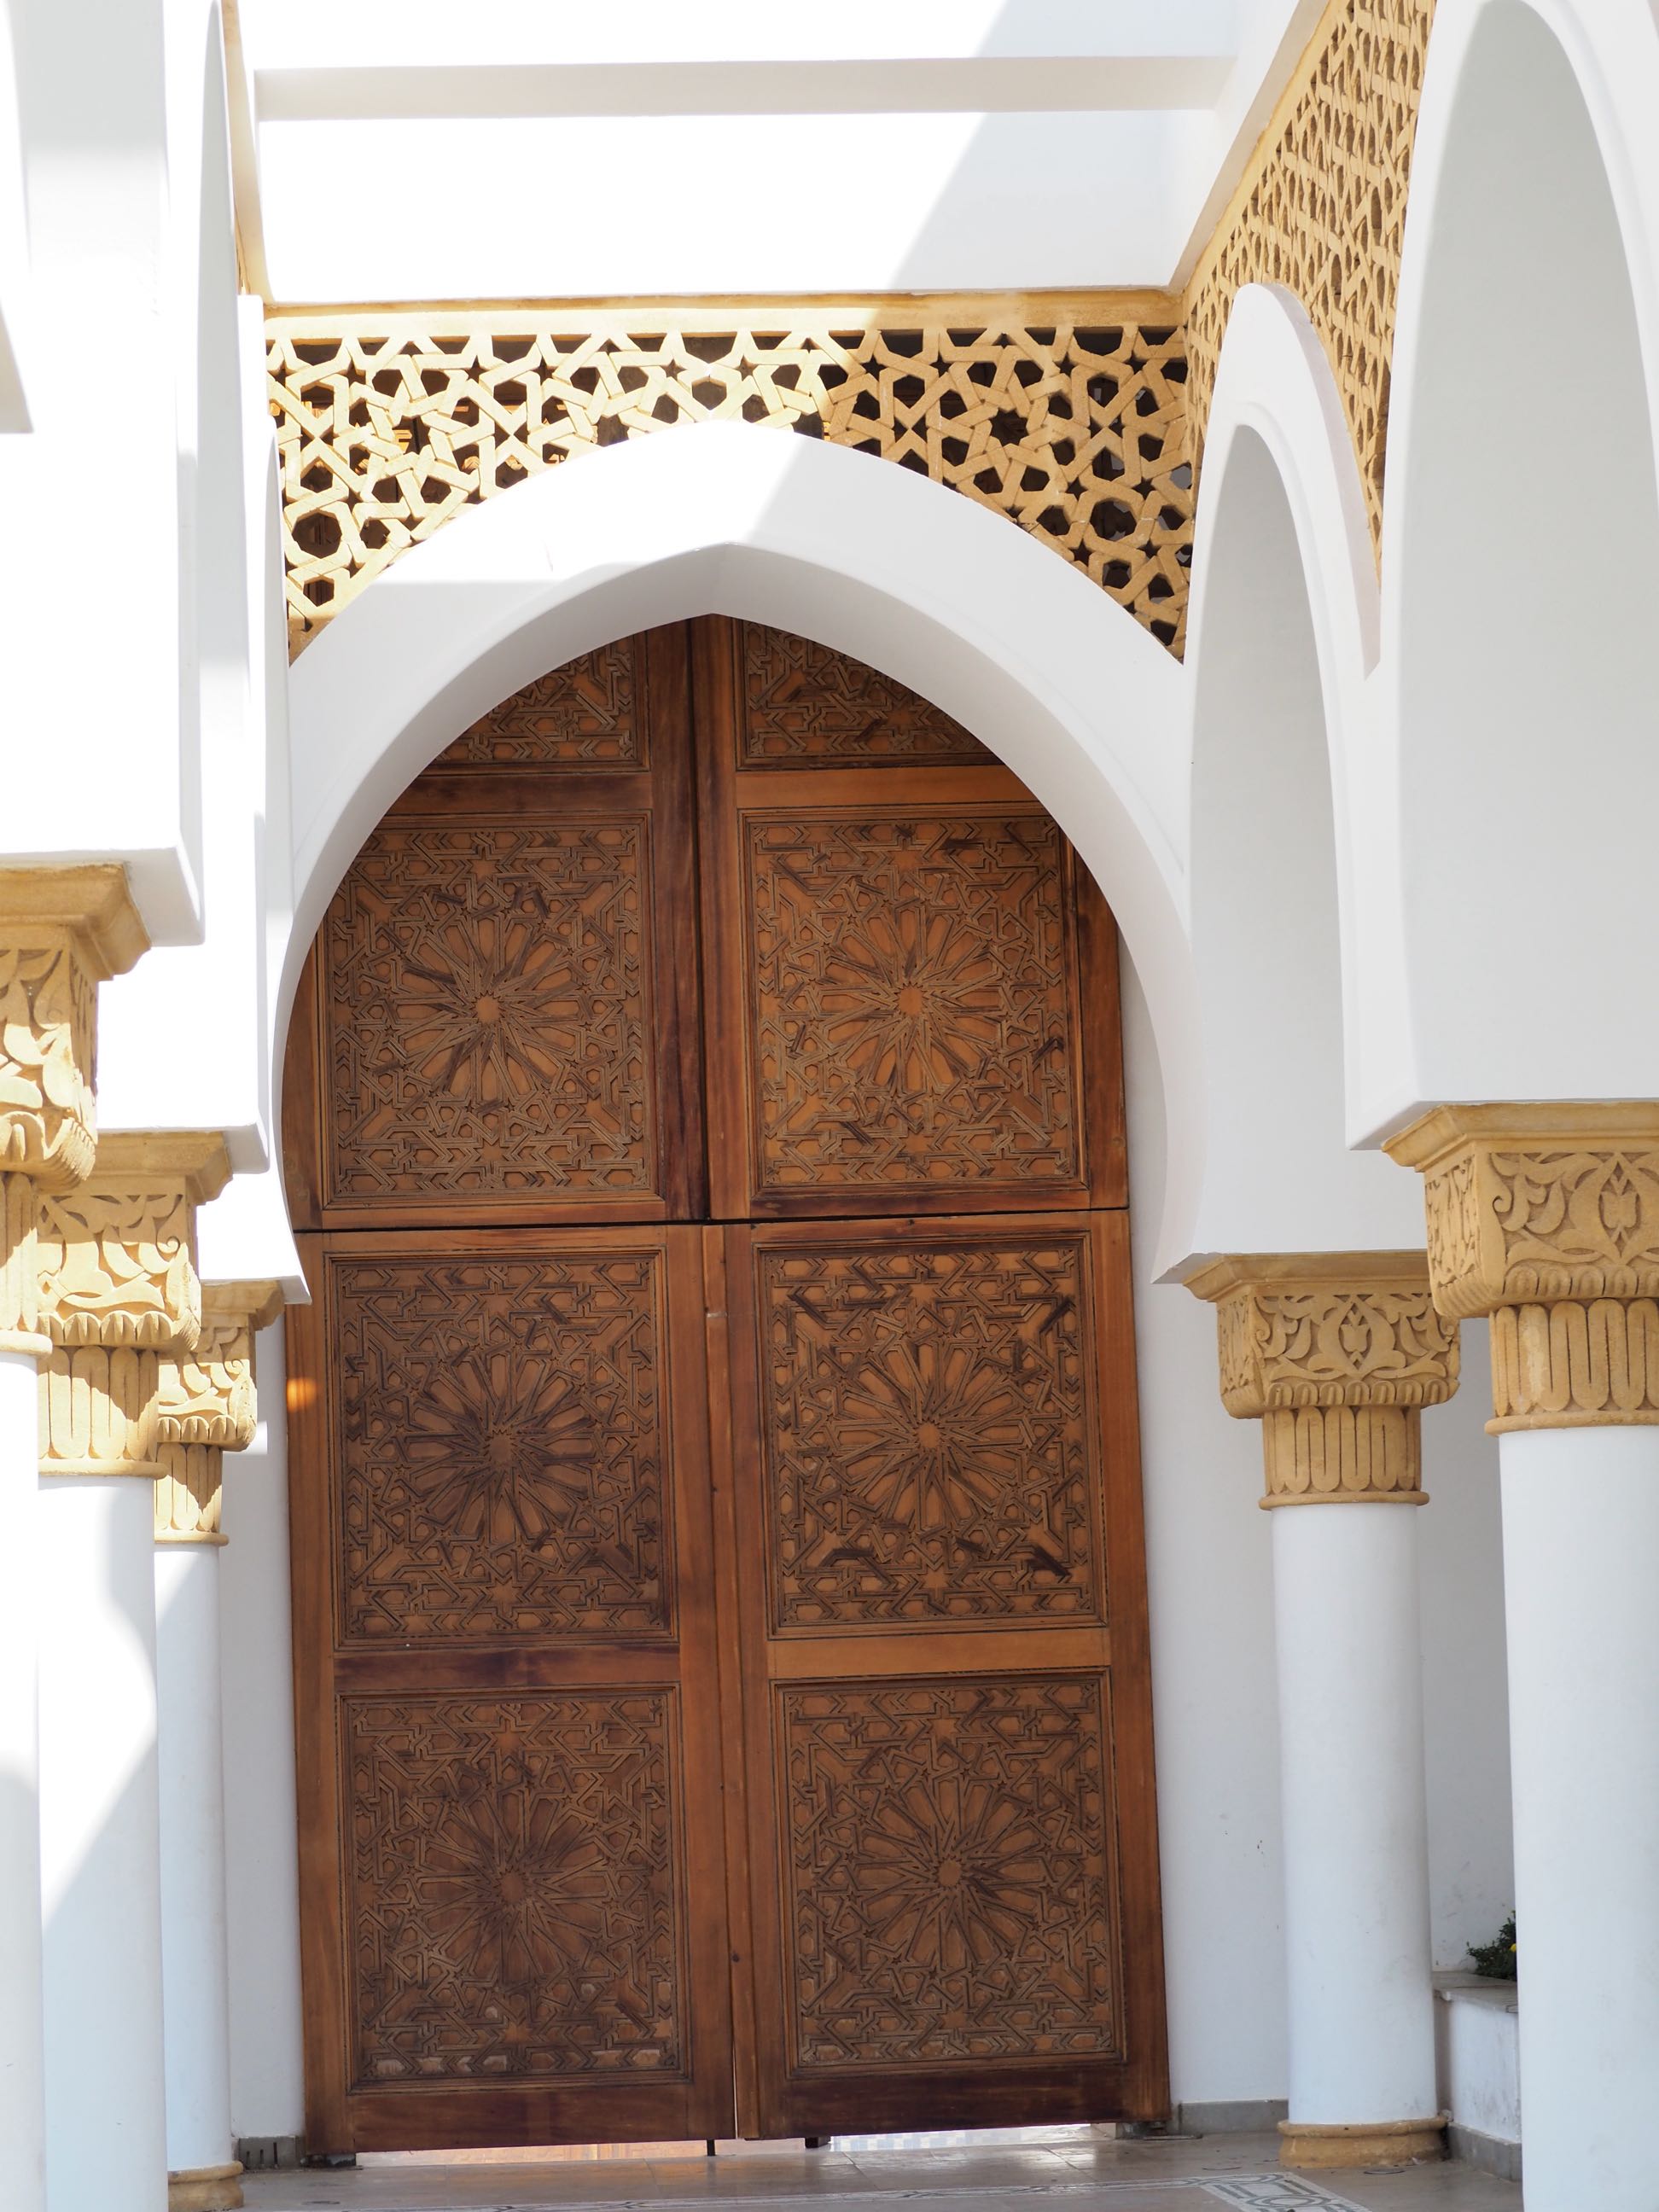 Princess Lalla ‘Abla’s Mosque  - <p>View past arches to the wood door with geometric patterns</p>